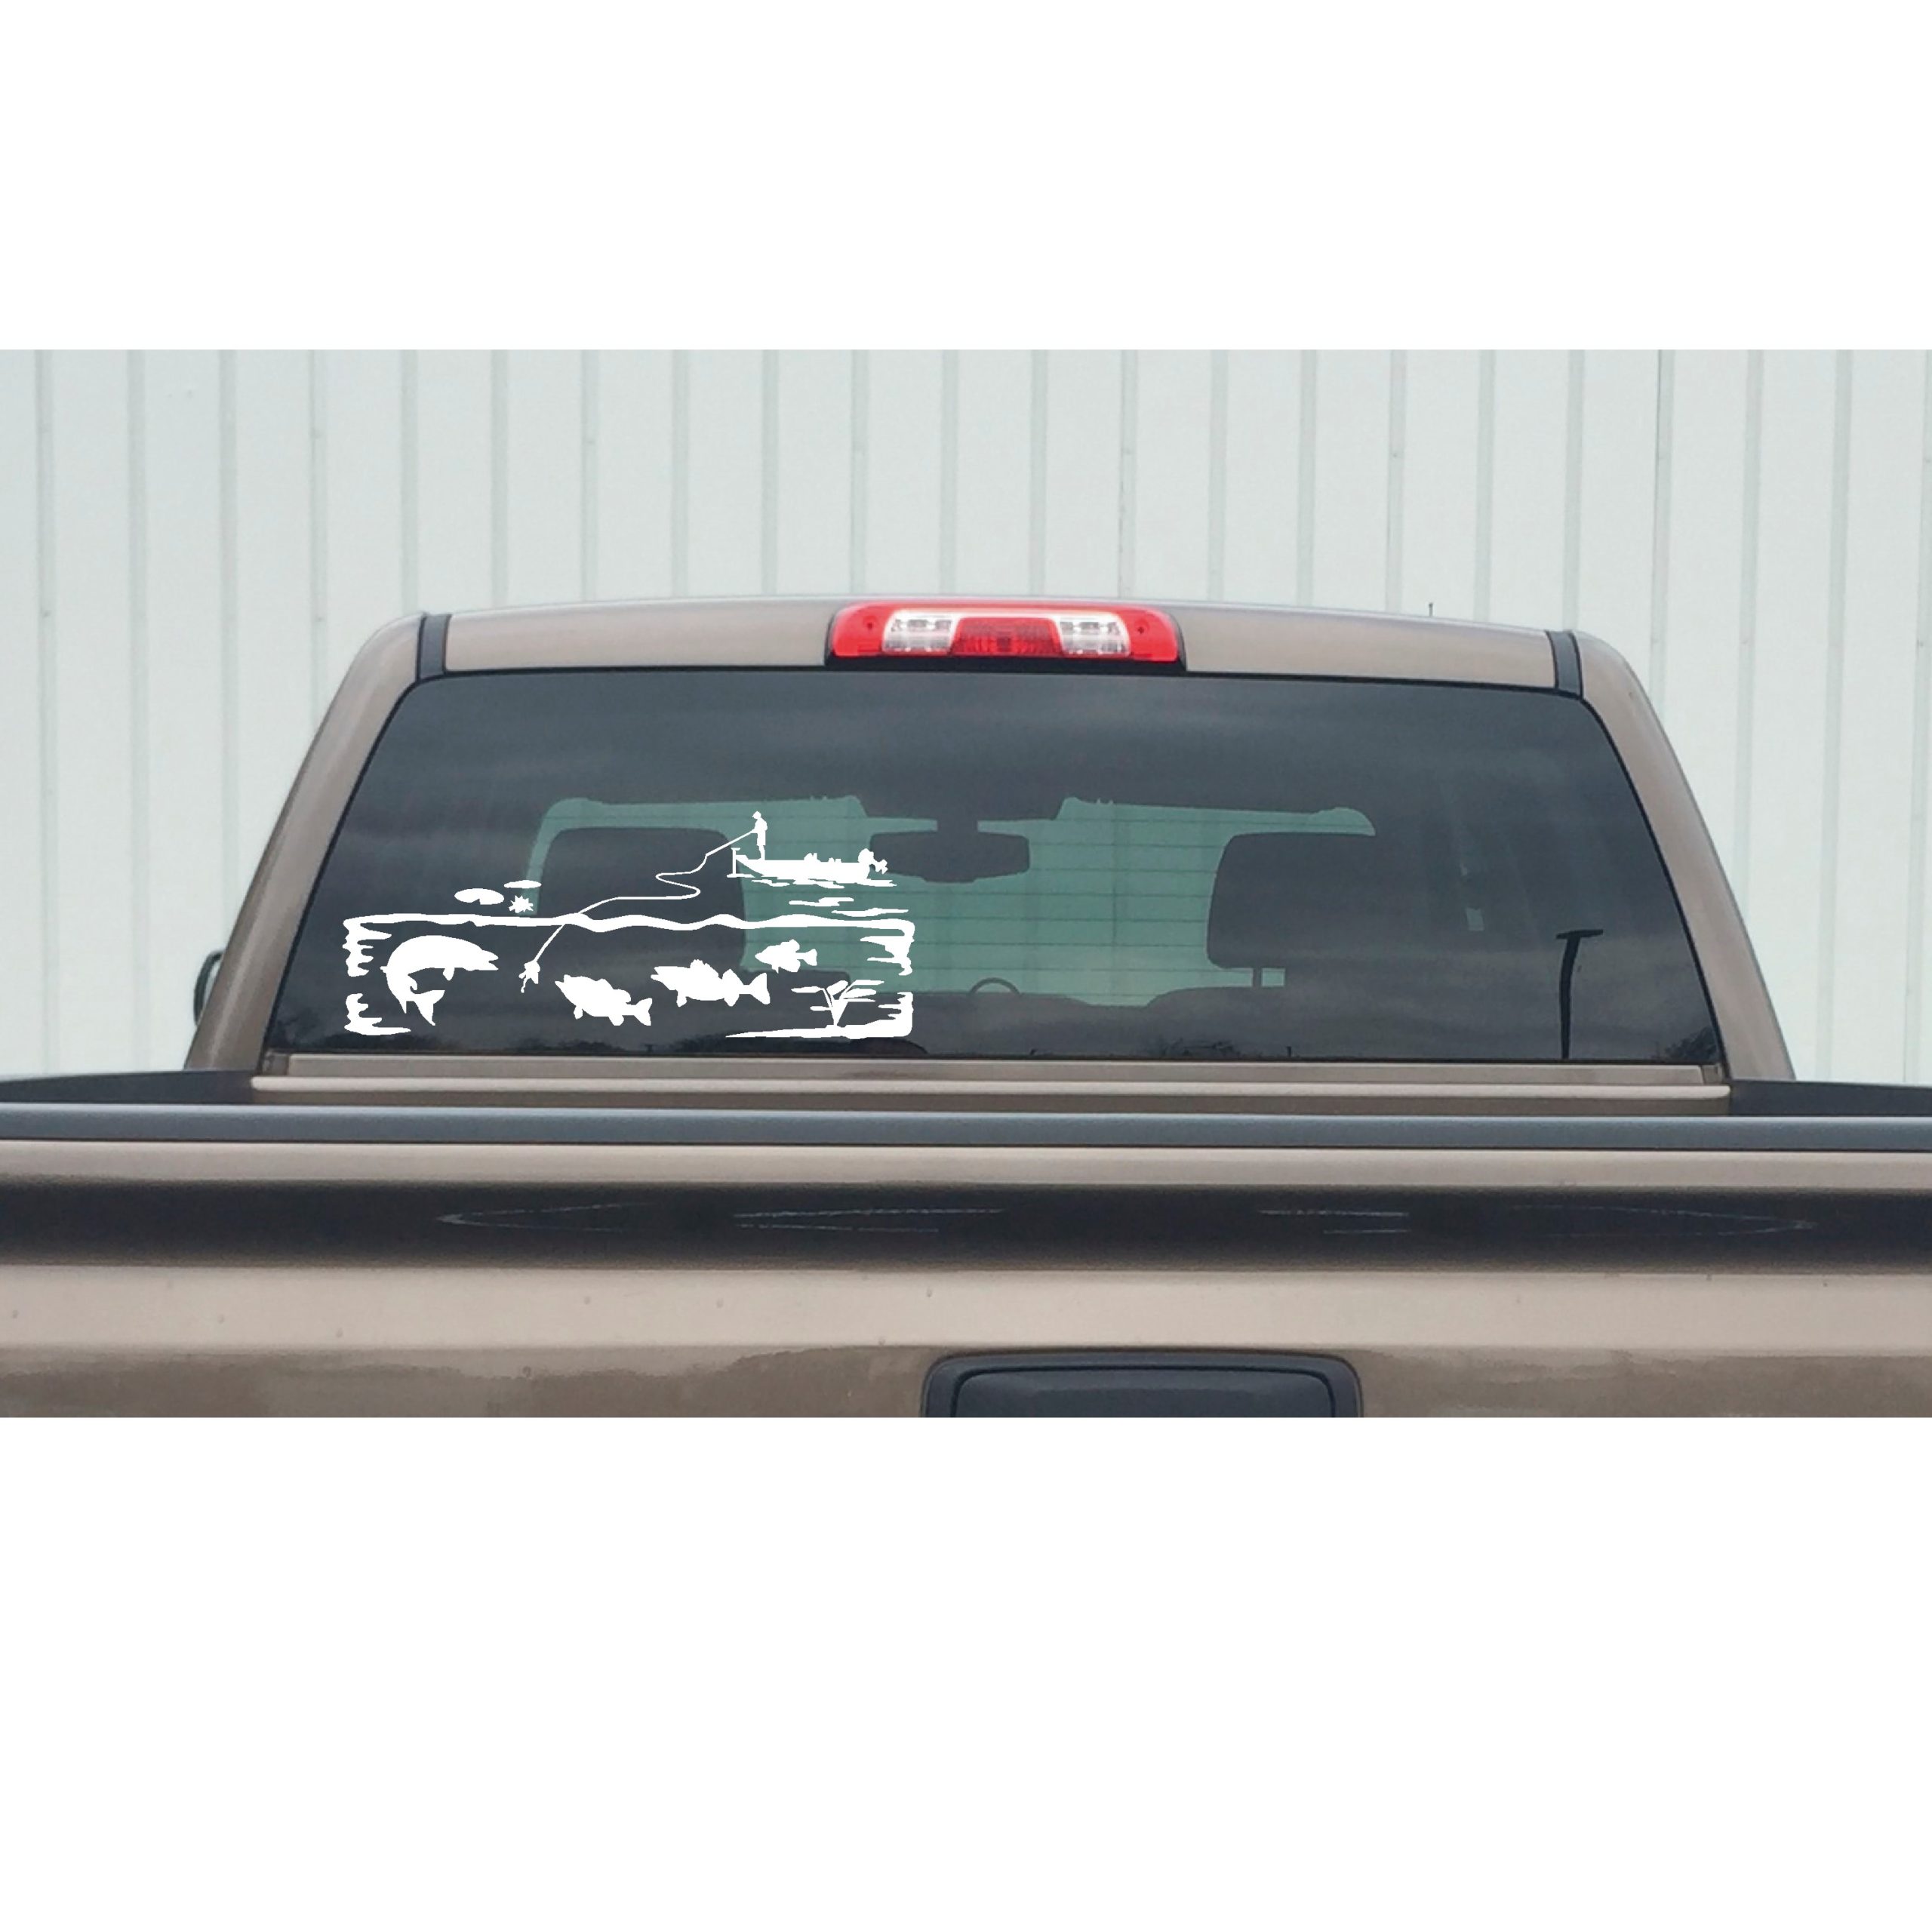 Fishing Decals lot of (13) stickers，good to stick on yuur truck